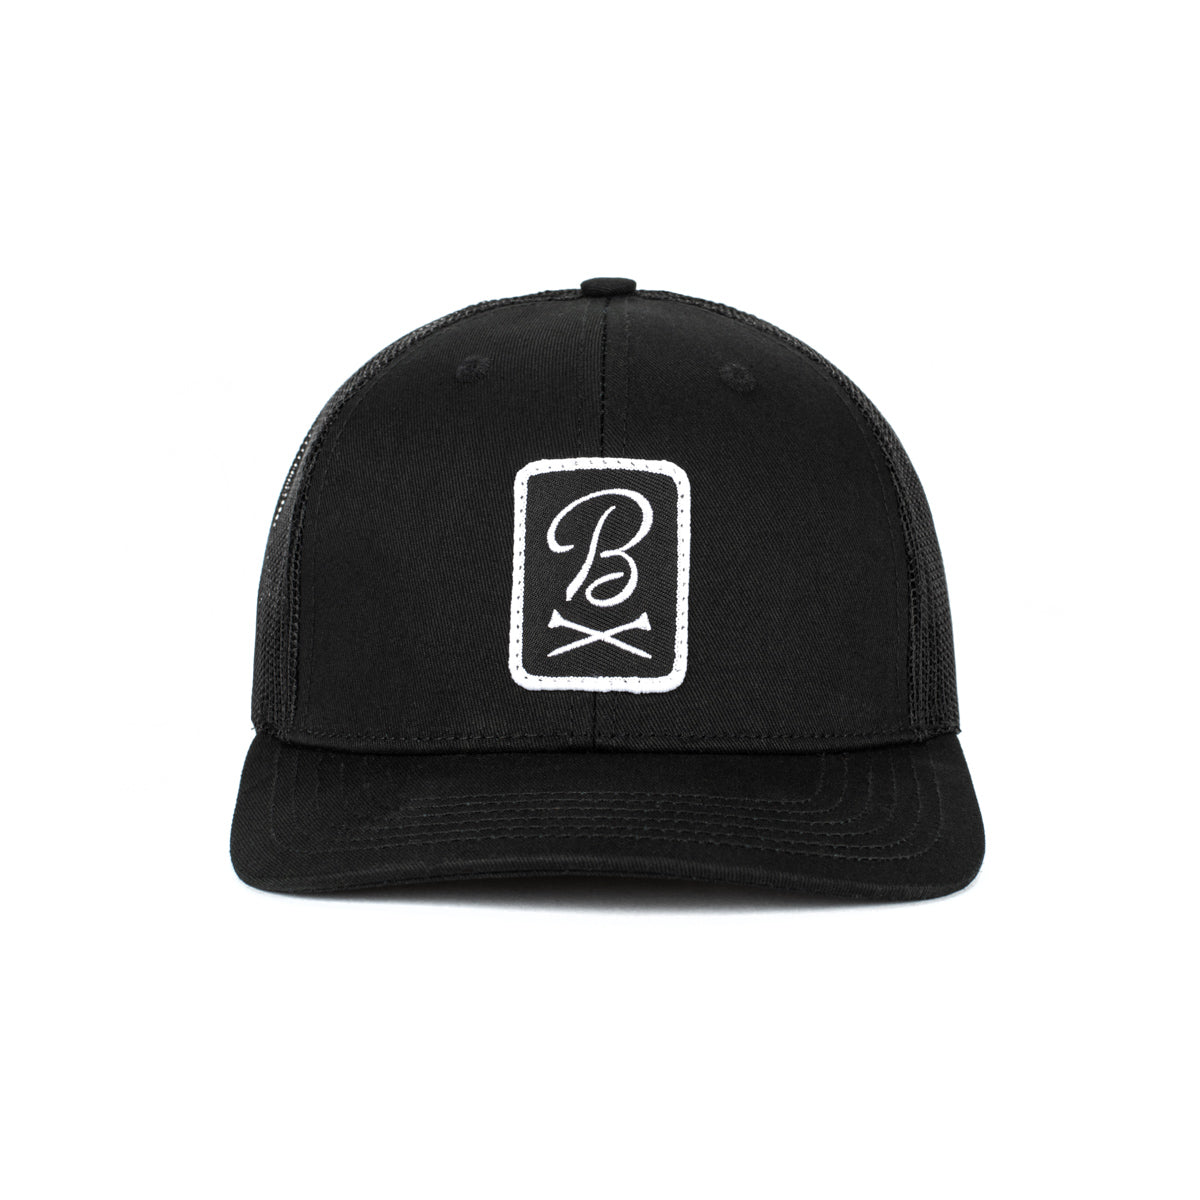 Barstool Golf Patch Trucker Hat-Hats-Fore Play-Black-Barstool Sports